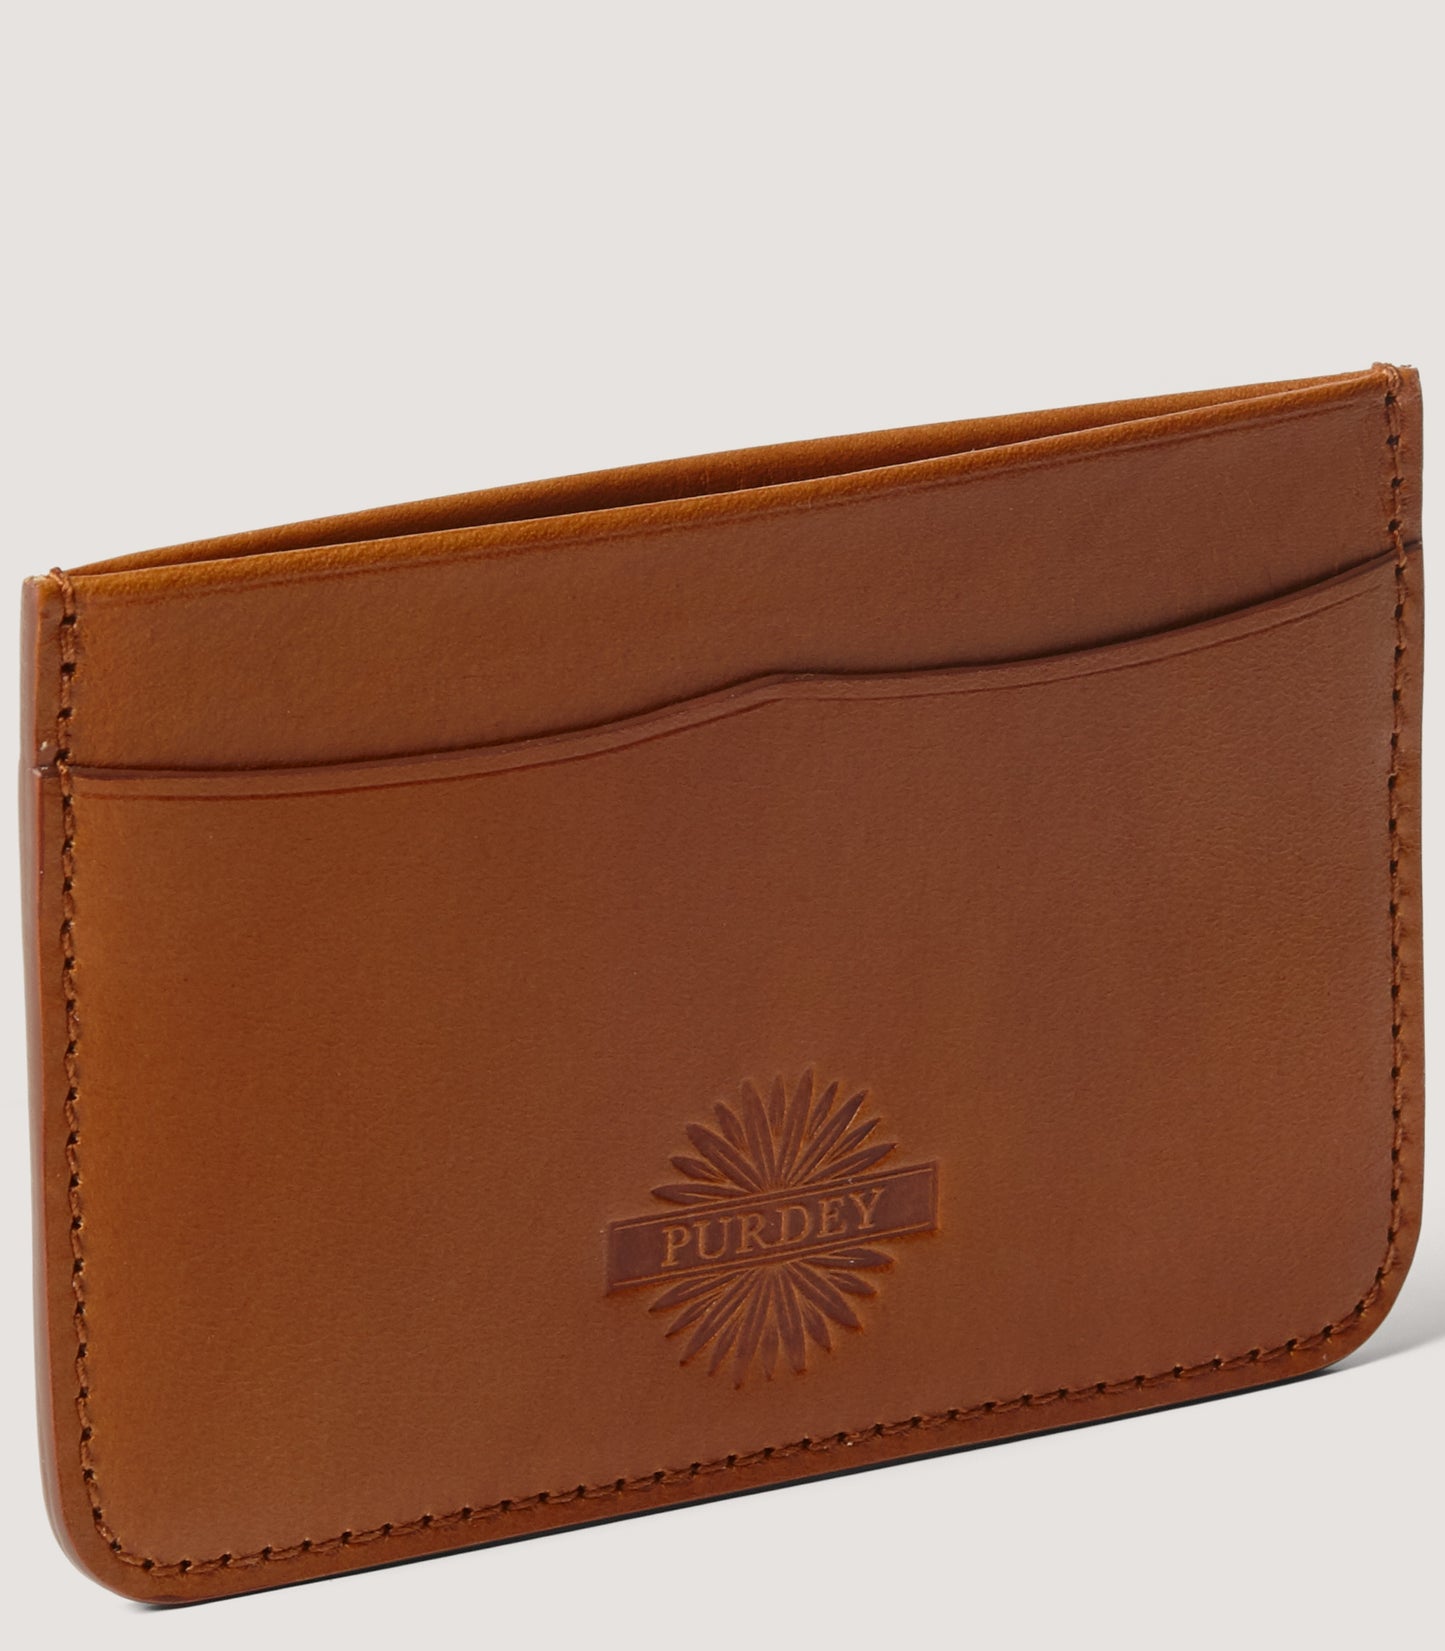 Leather Credit Card Holder In London Tan